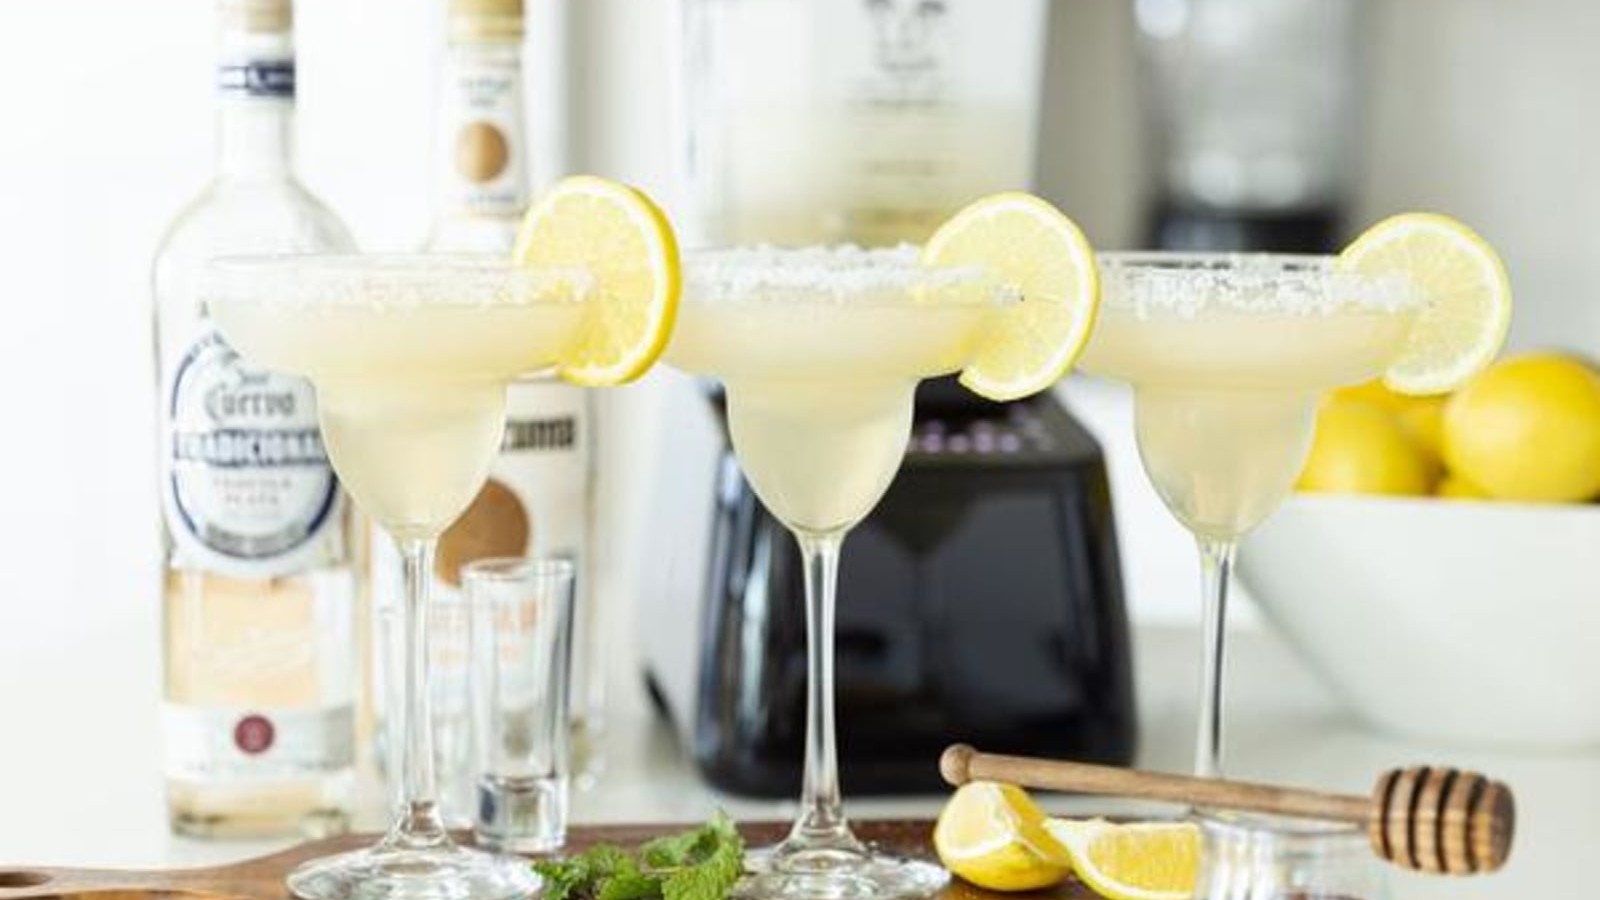 Image of The Classic Margarita from Blendtec